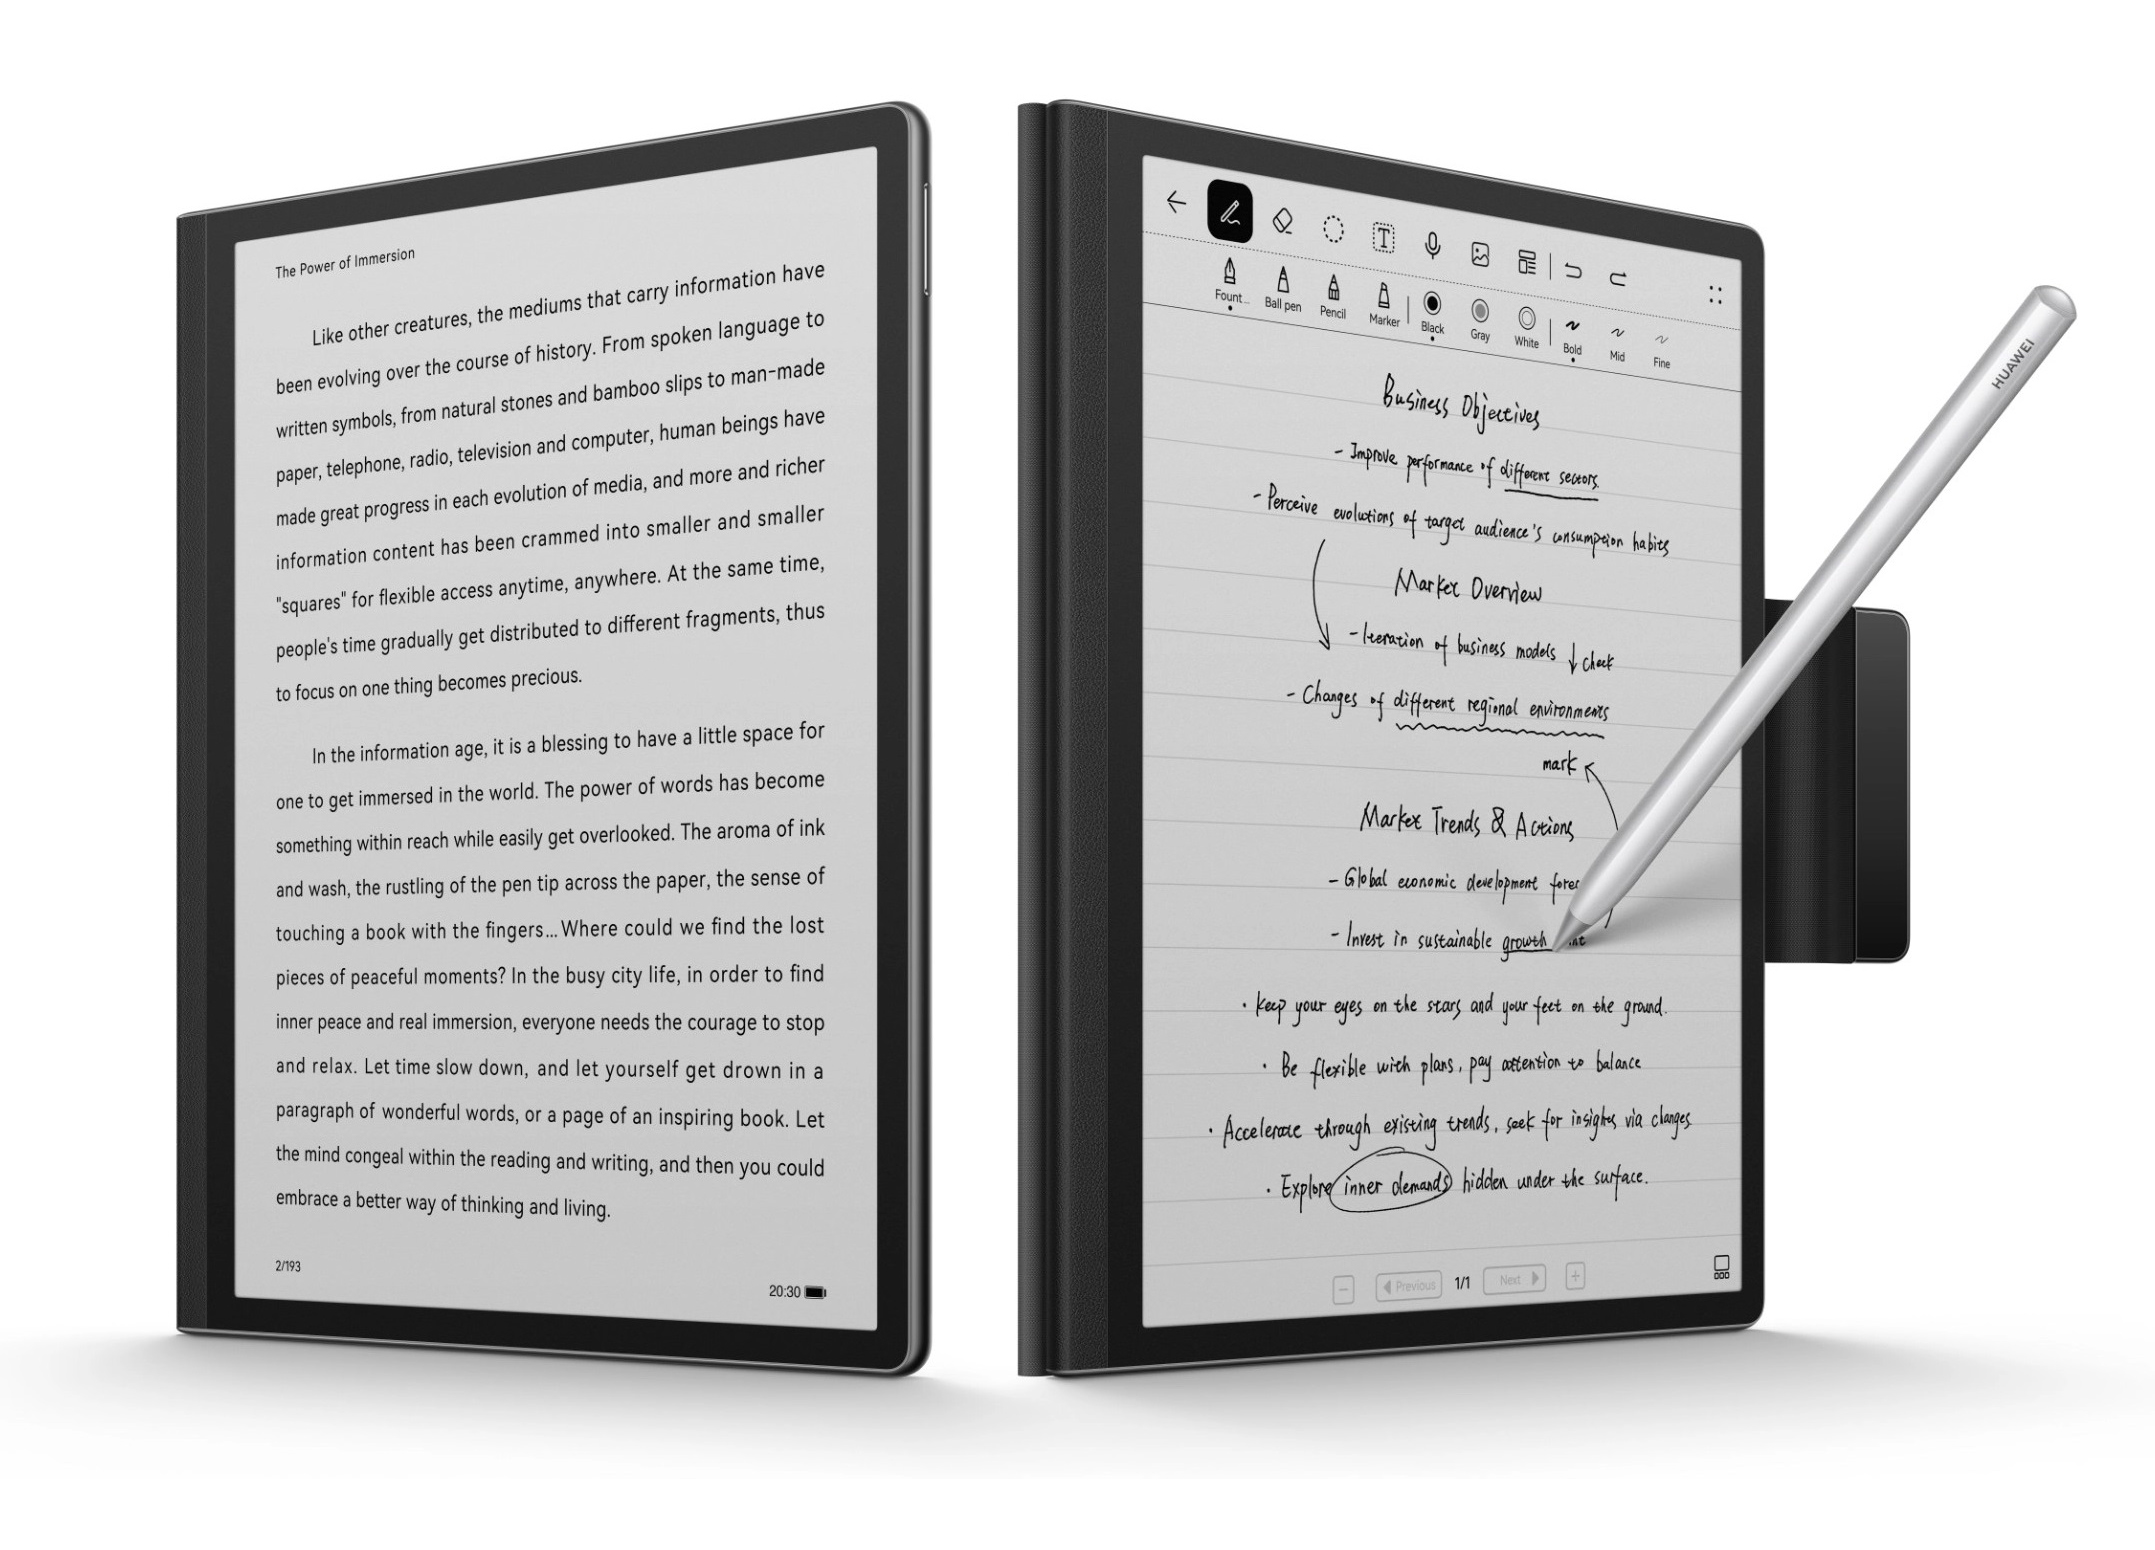 Huawei MatePad Paper review – The E Ink tablet can handle Android